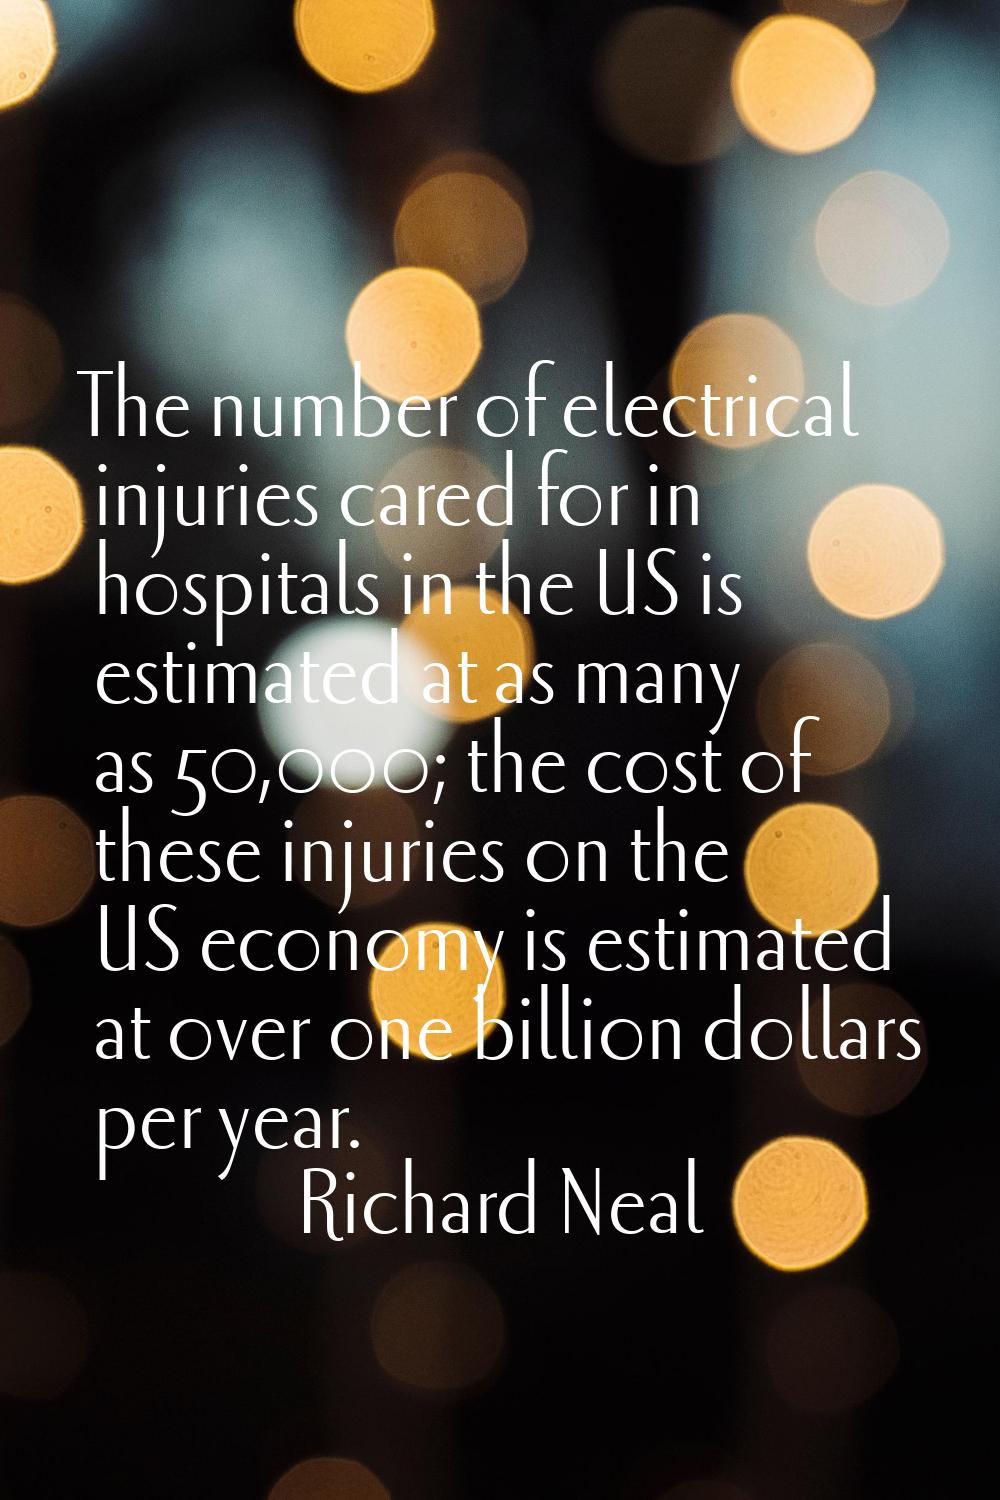 The number of electrical injuries cared for in hospitals in the US is estimated at as many as 50,00